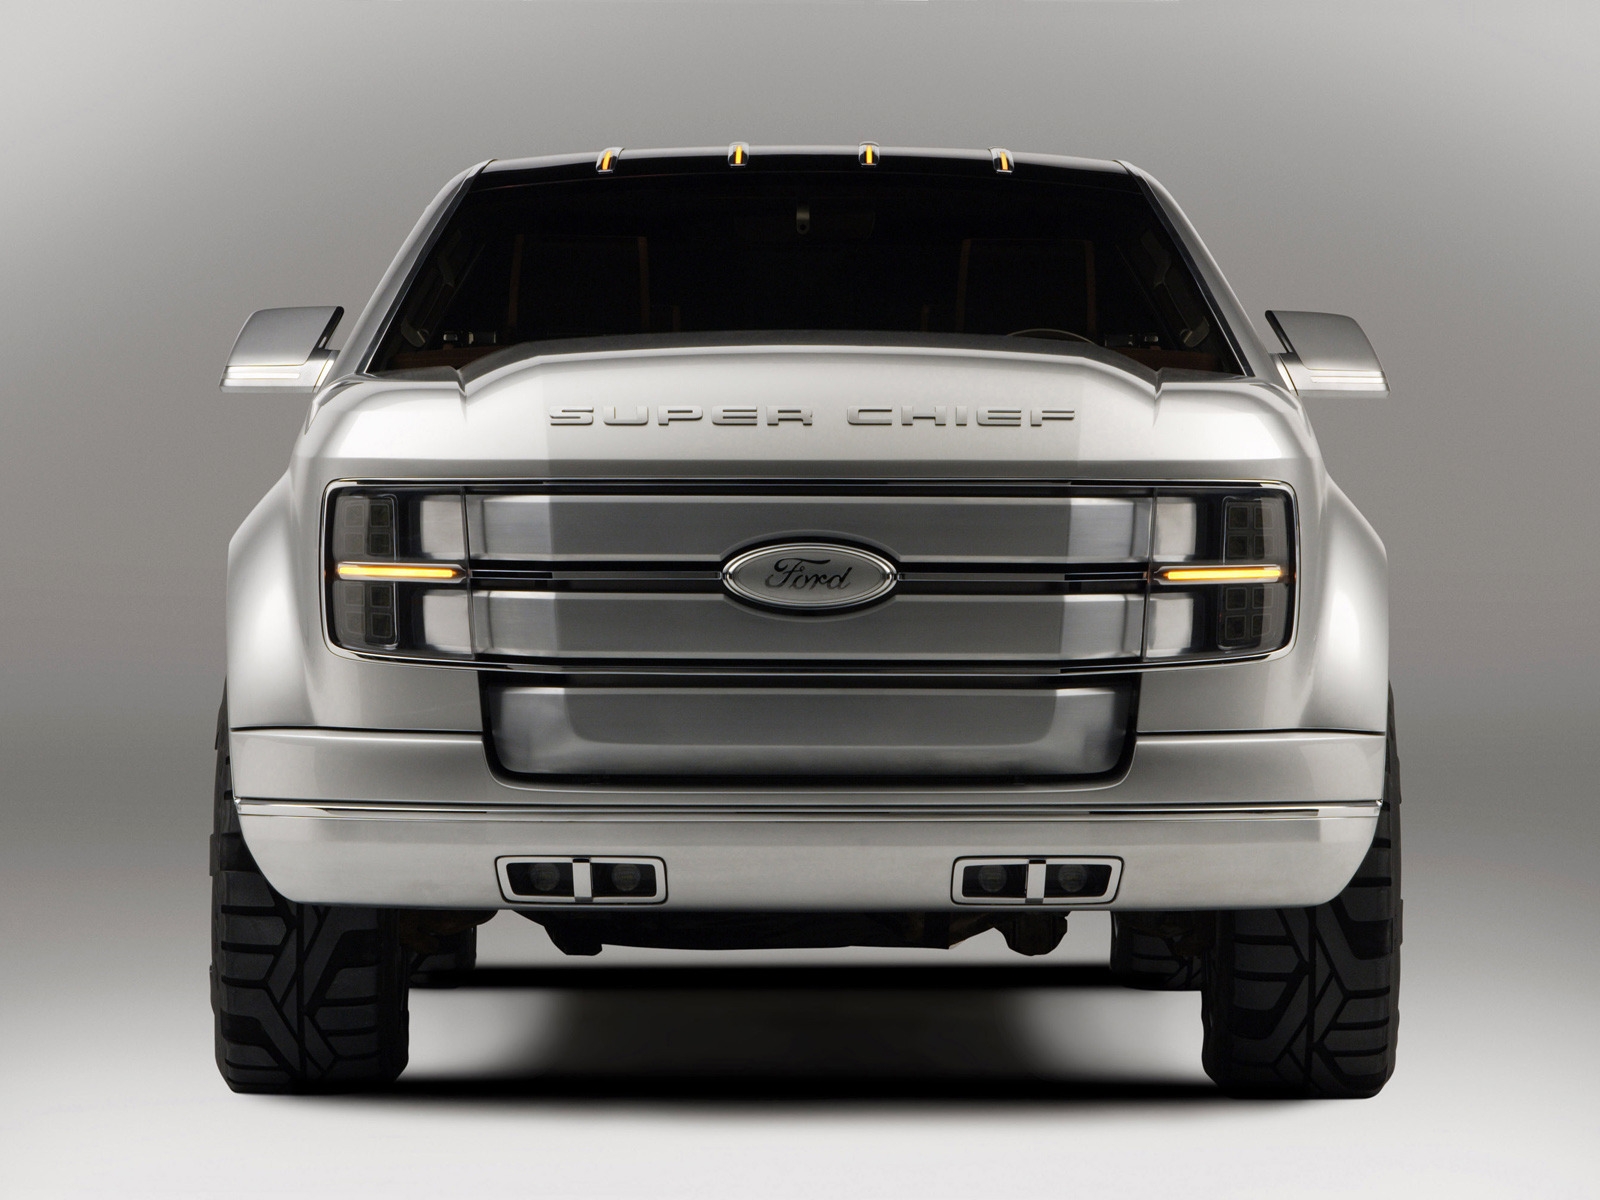 Ford Super Chief for 1600 x 1200 resolution